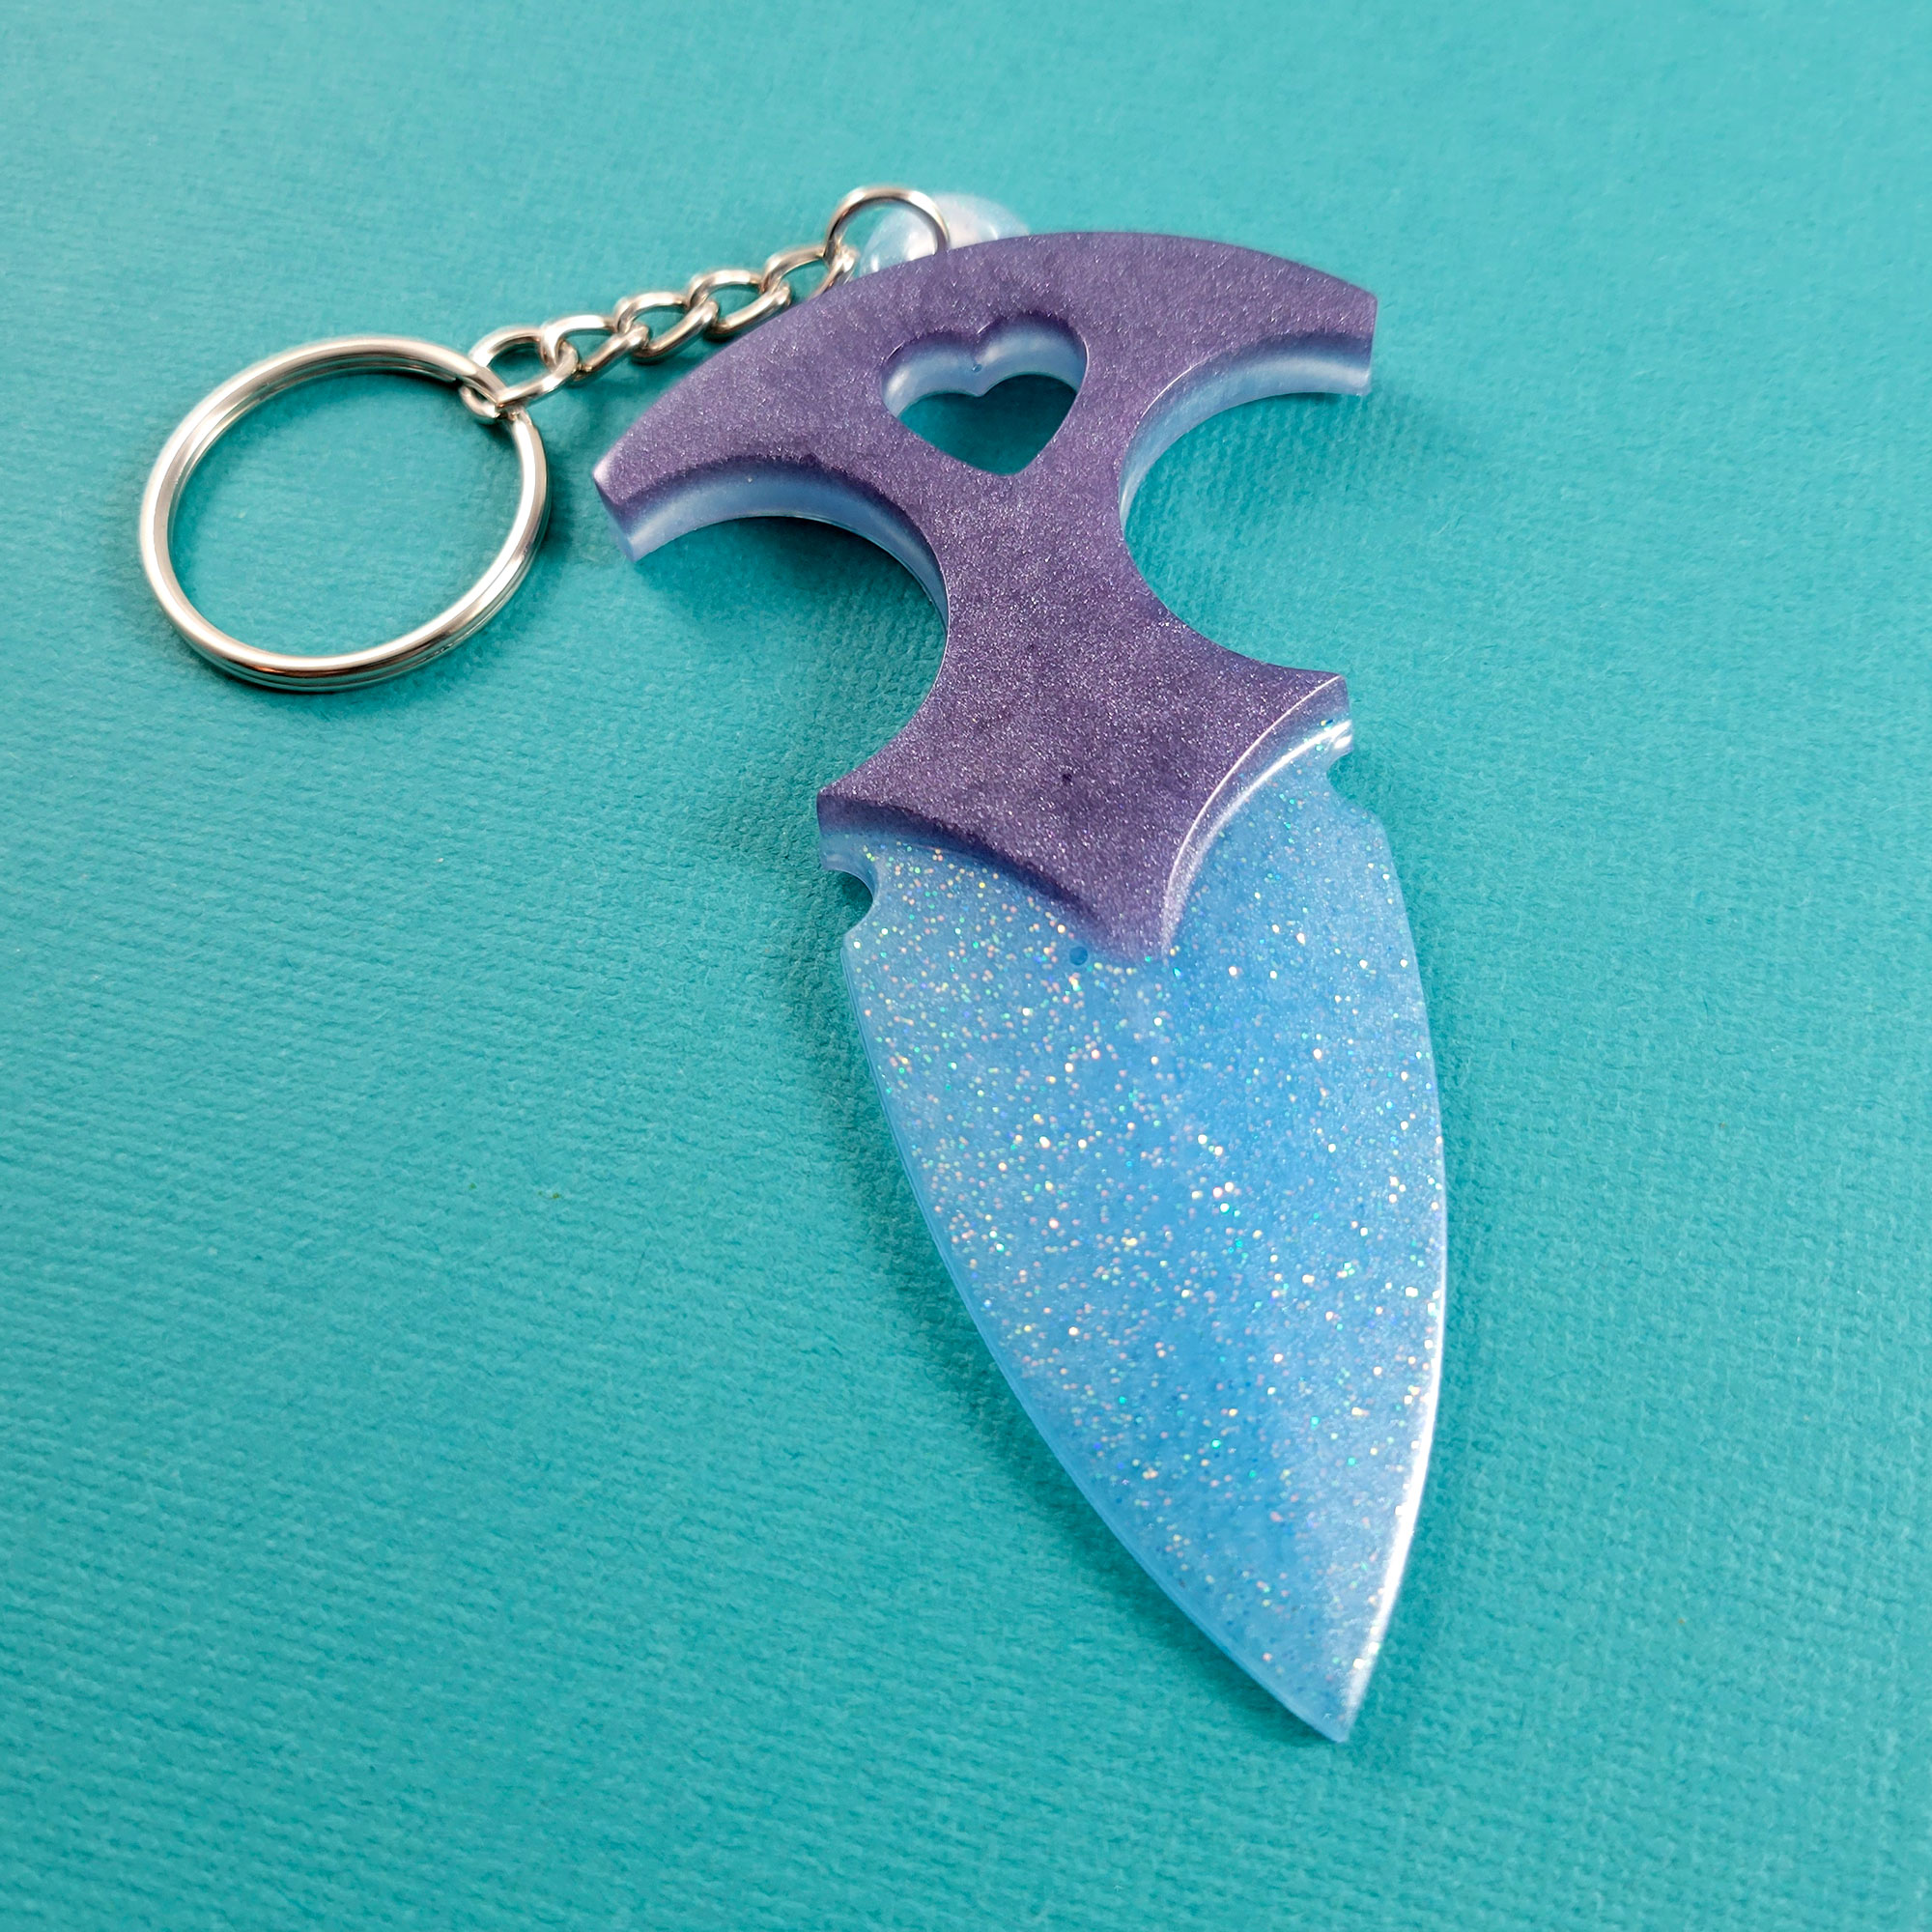 Sweetheart Safety Keychain by Wilde Designs